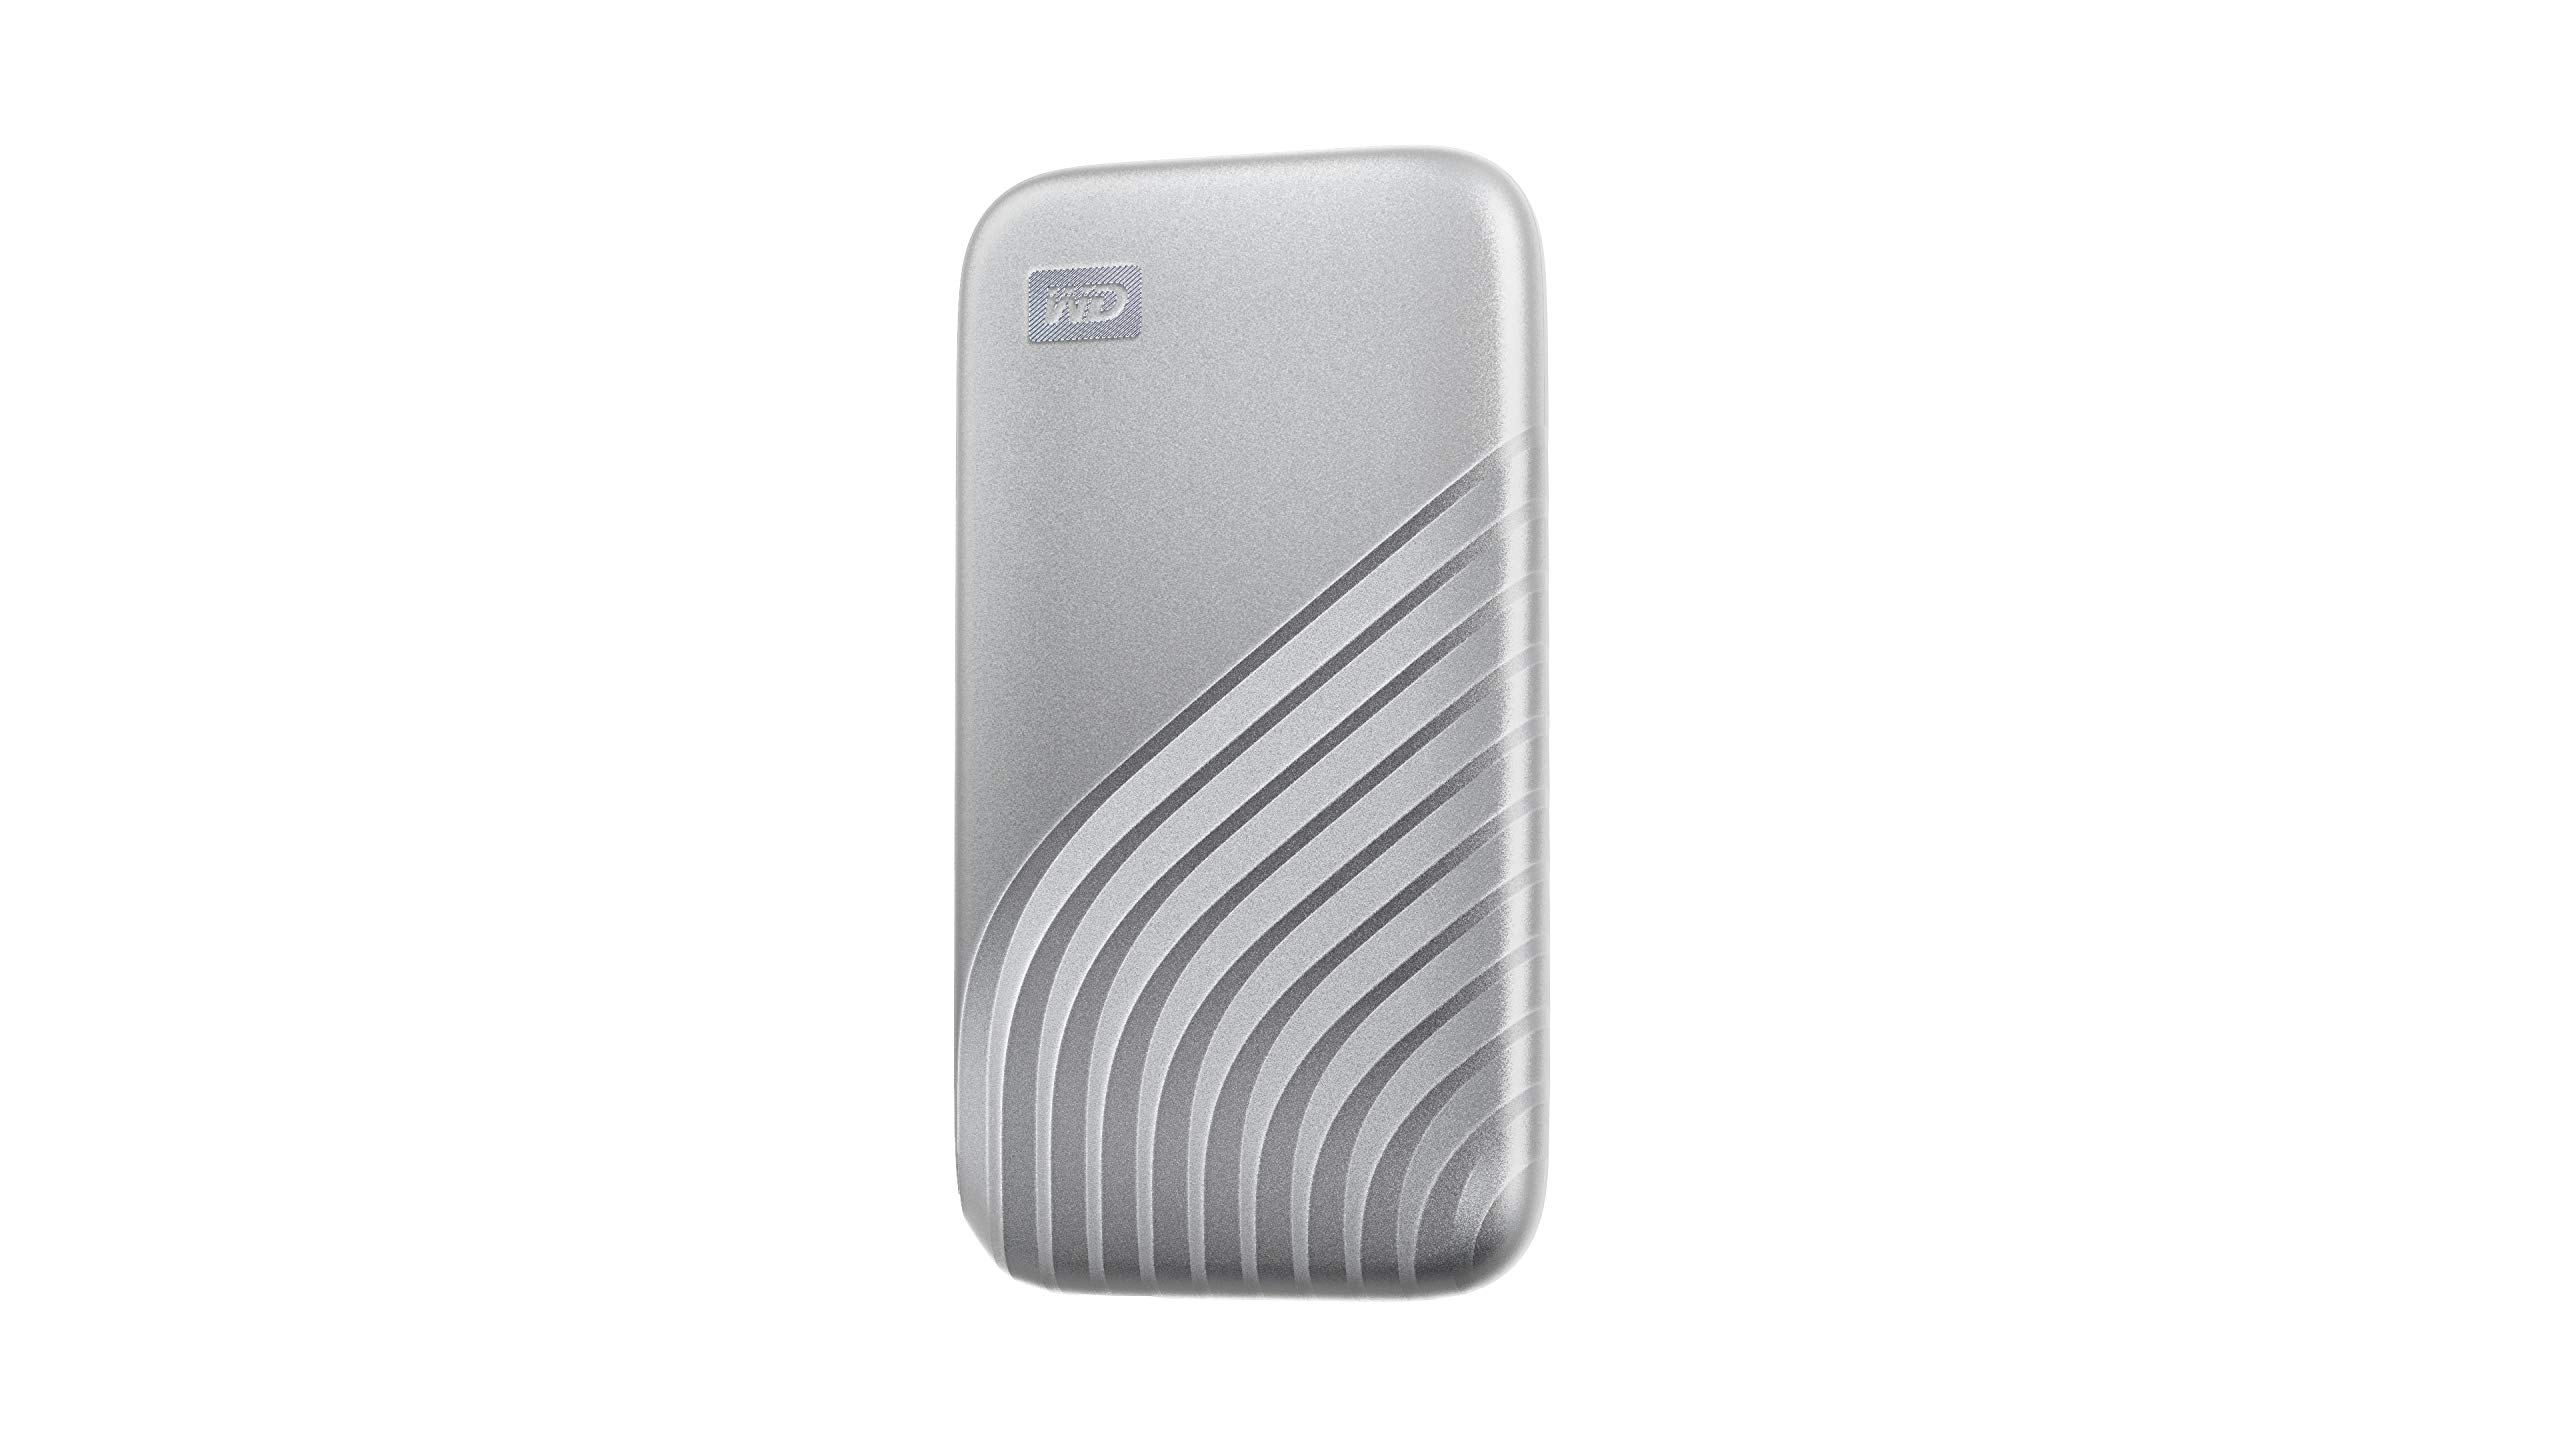 2TB WD My Passport Portable External SSD (Various Colors) $138 + Free Shipping